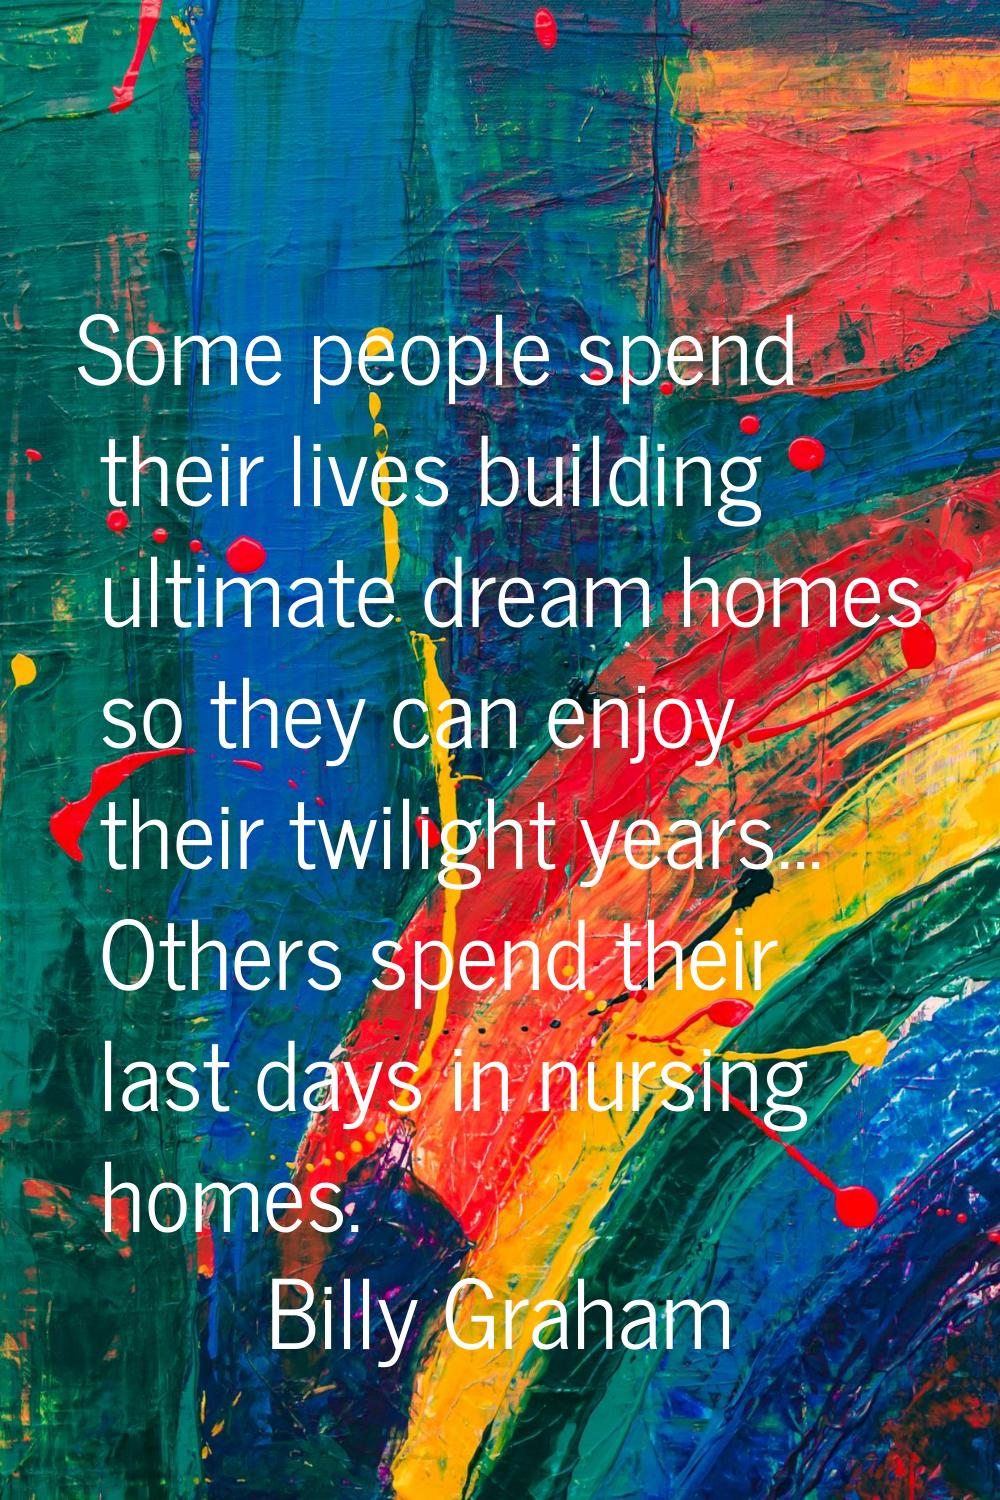 Some people spend their lives building ultimate dream homes so they can enjoy their twilight years.